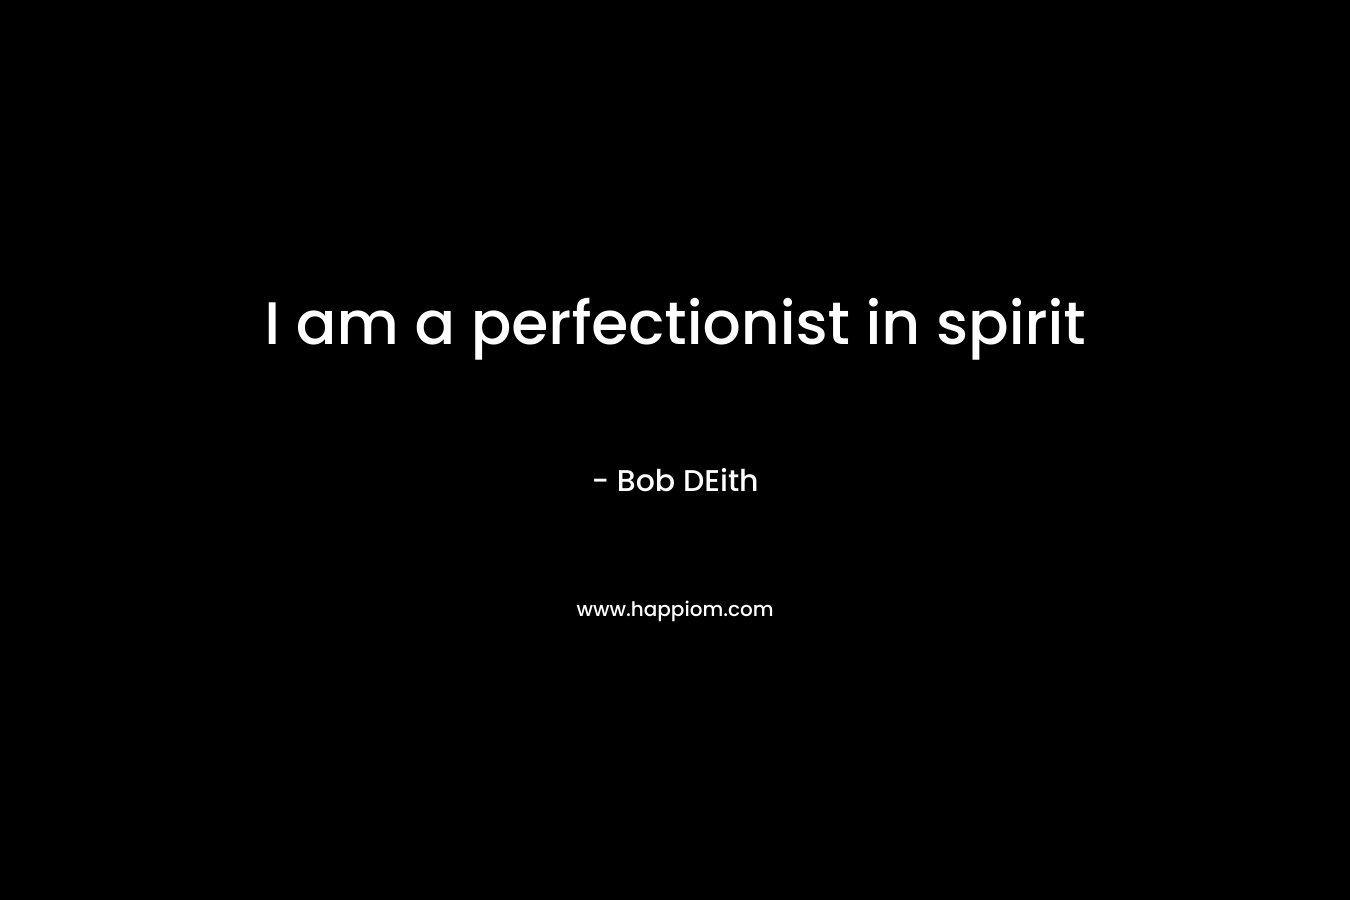 I am a perfectionist in spirit